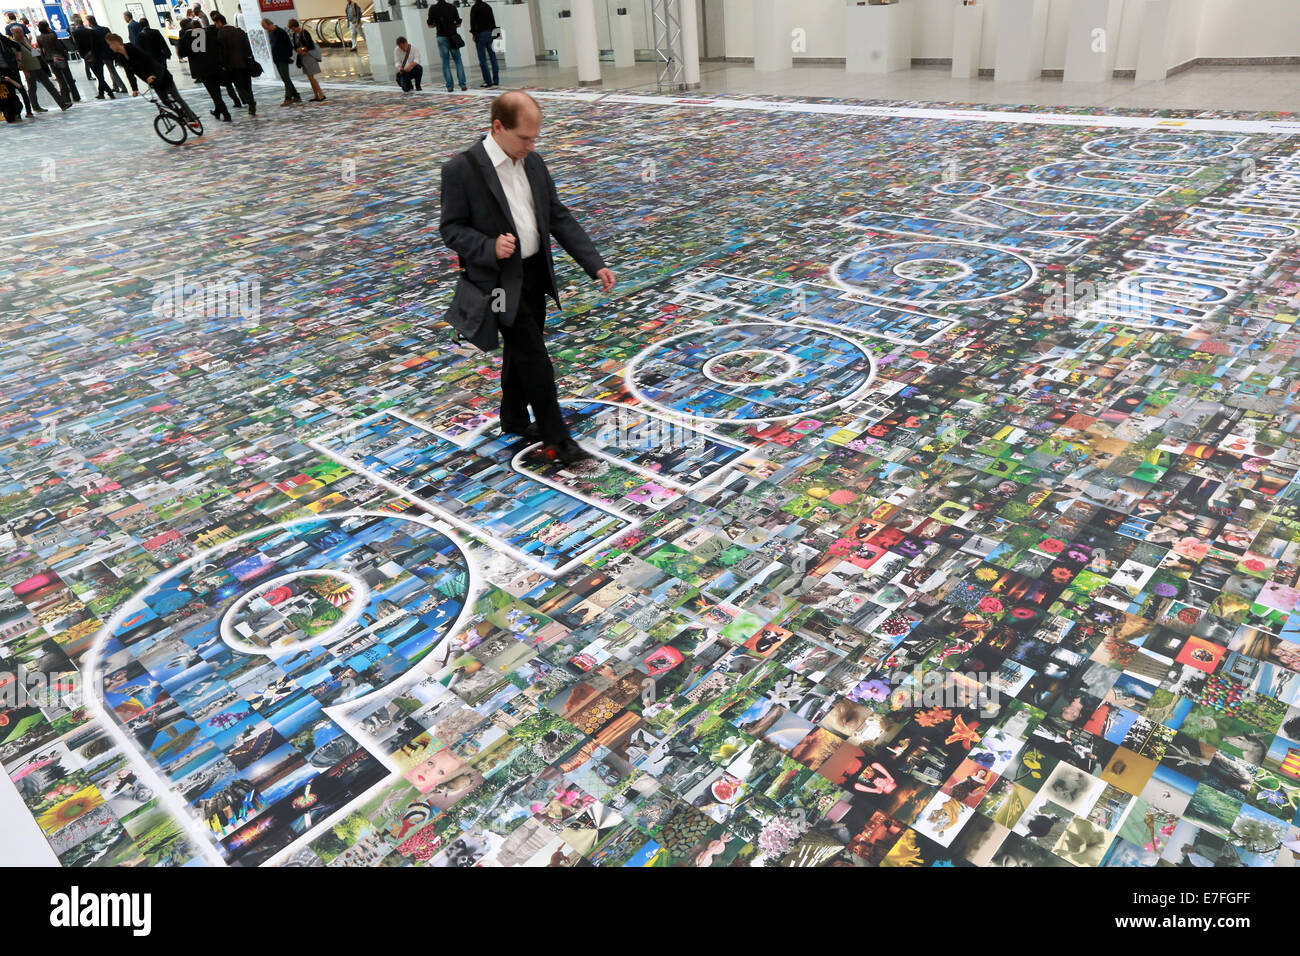 People walking on a floor covered with thousands of photos, Photokina 2014, Cologne, Germany Stock Photo